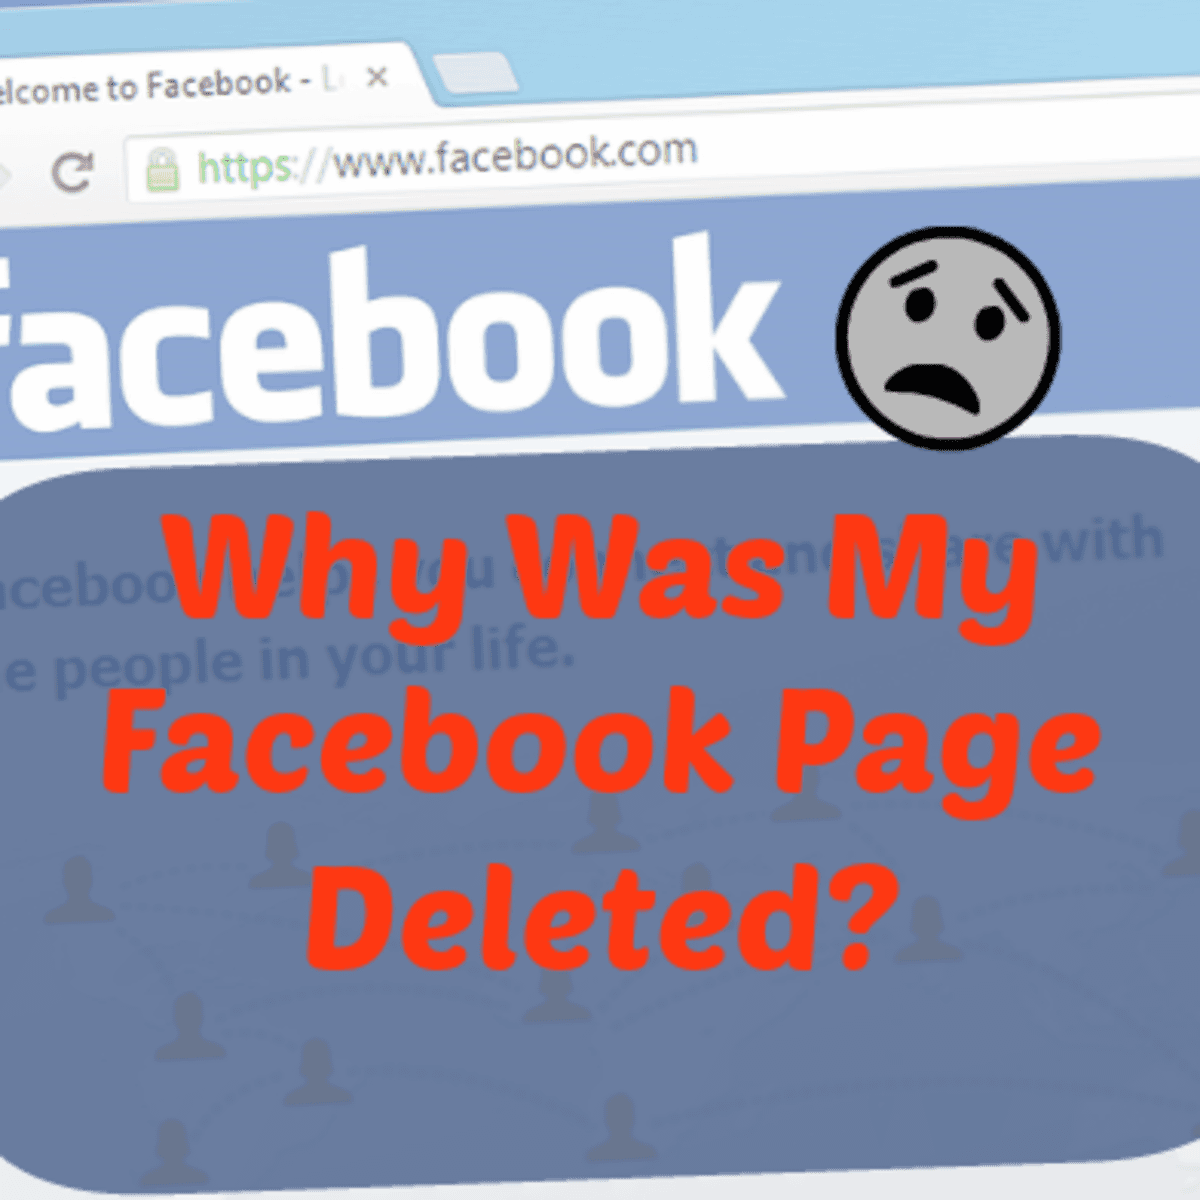 Logging in to Your Facebook Account Without a Password - TurboFuture